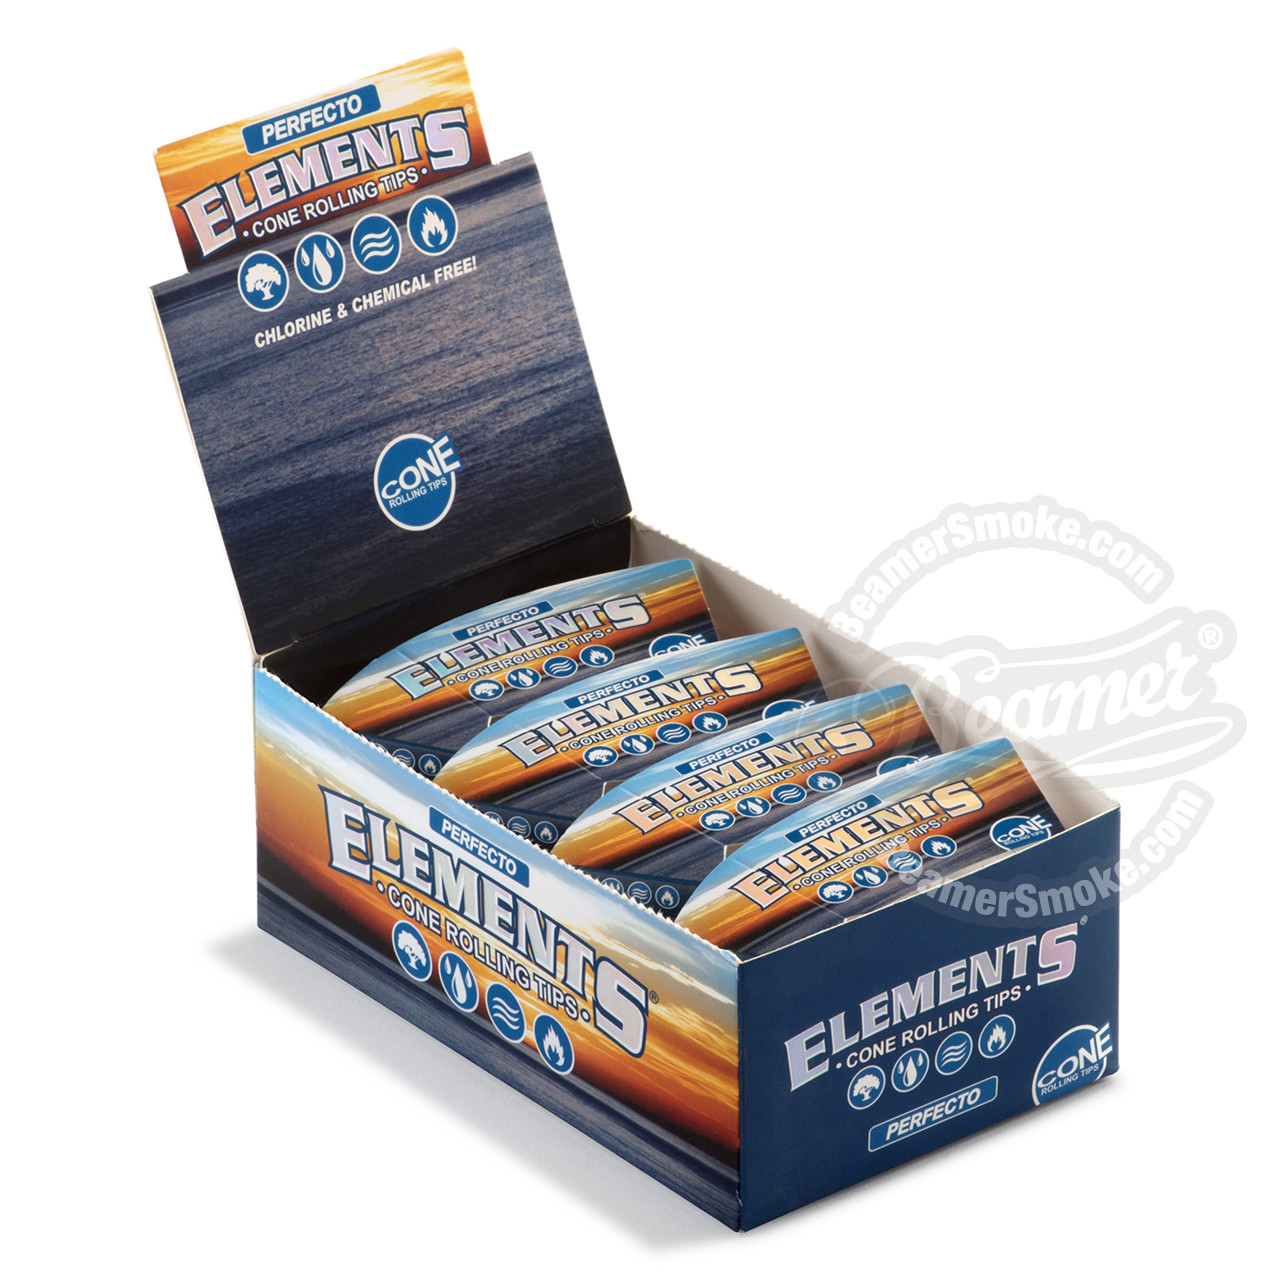 ELEMENTS PERFECTO CONE FILTER ROLLING TIPS 6 PACKS 